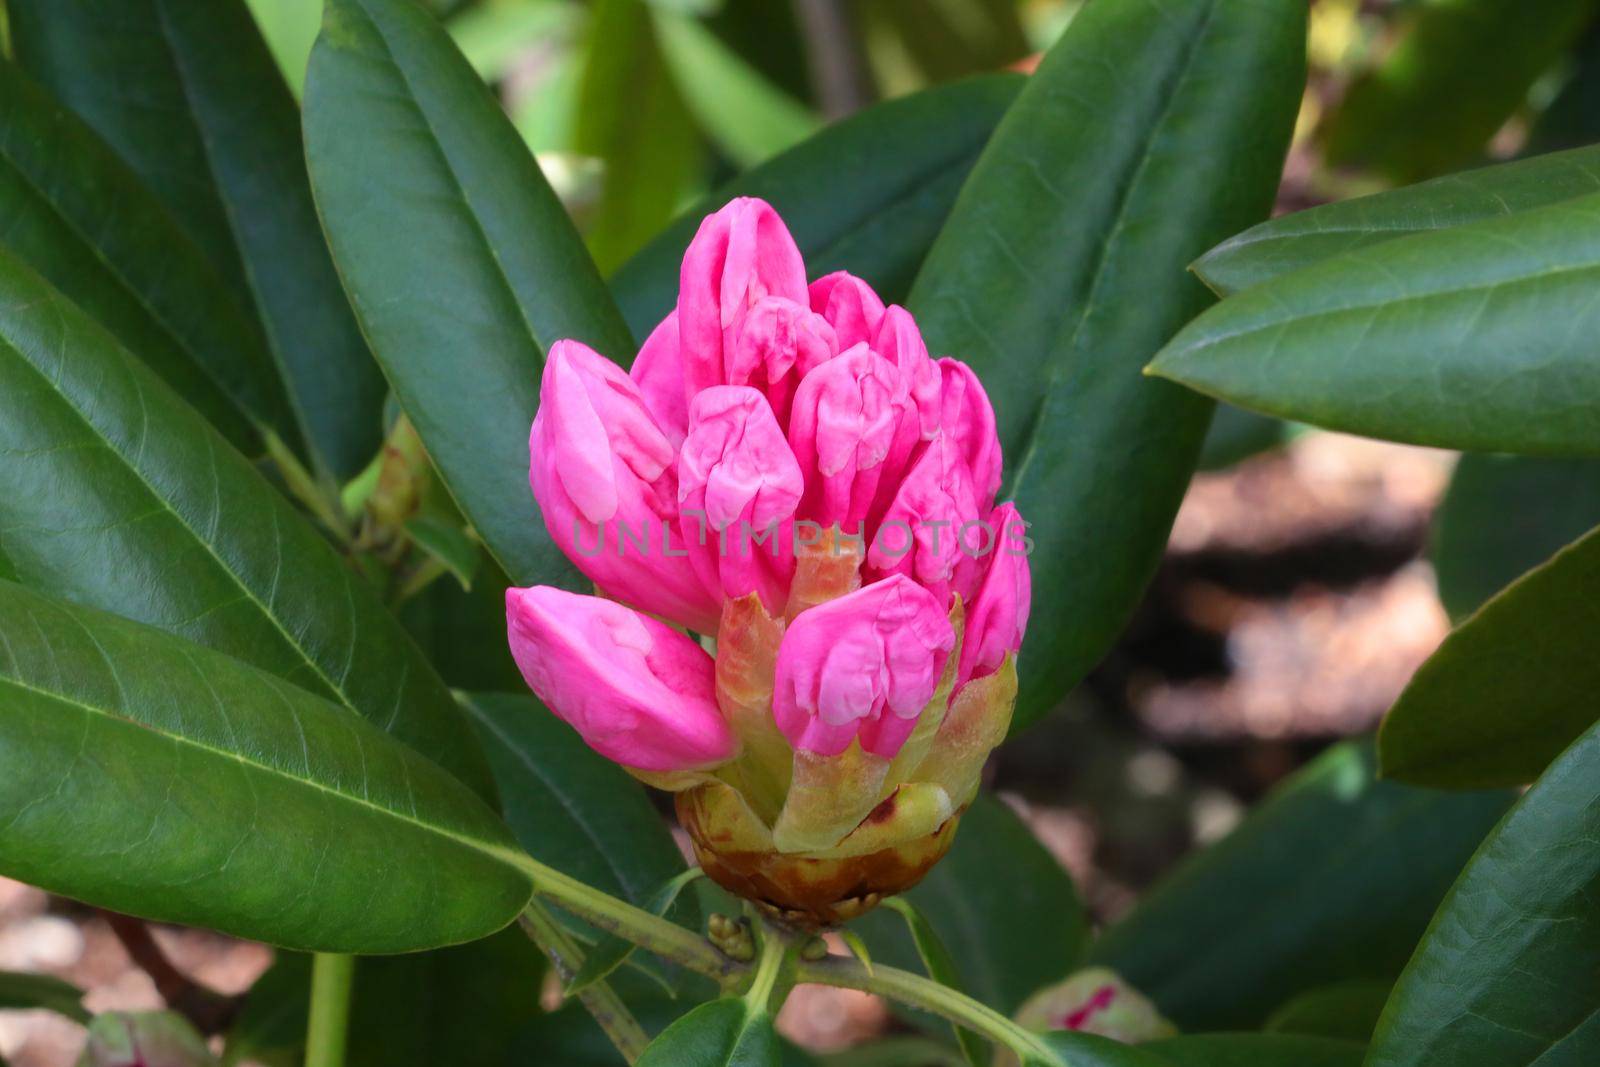 A red flowering rhododendron bud in the park in the spring. by kip02kas